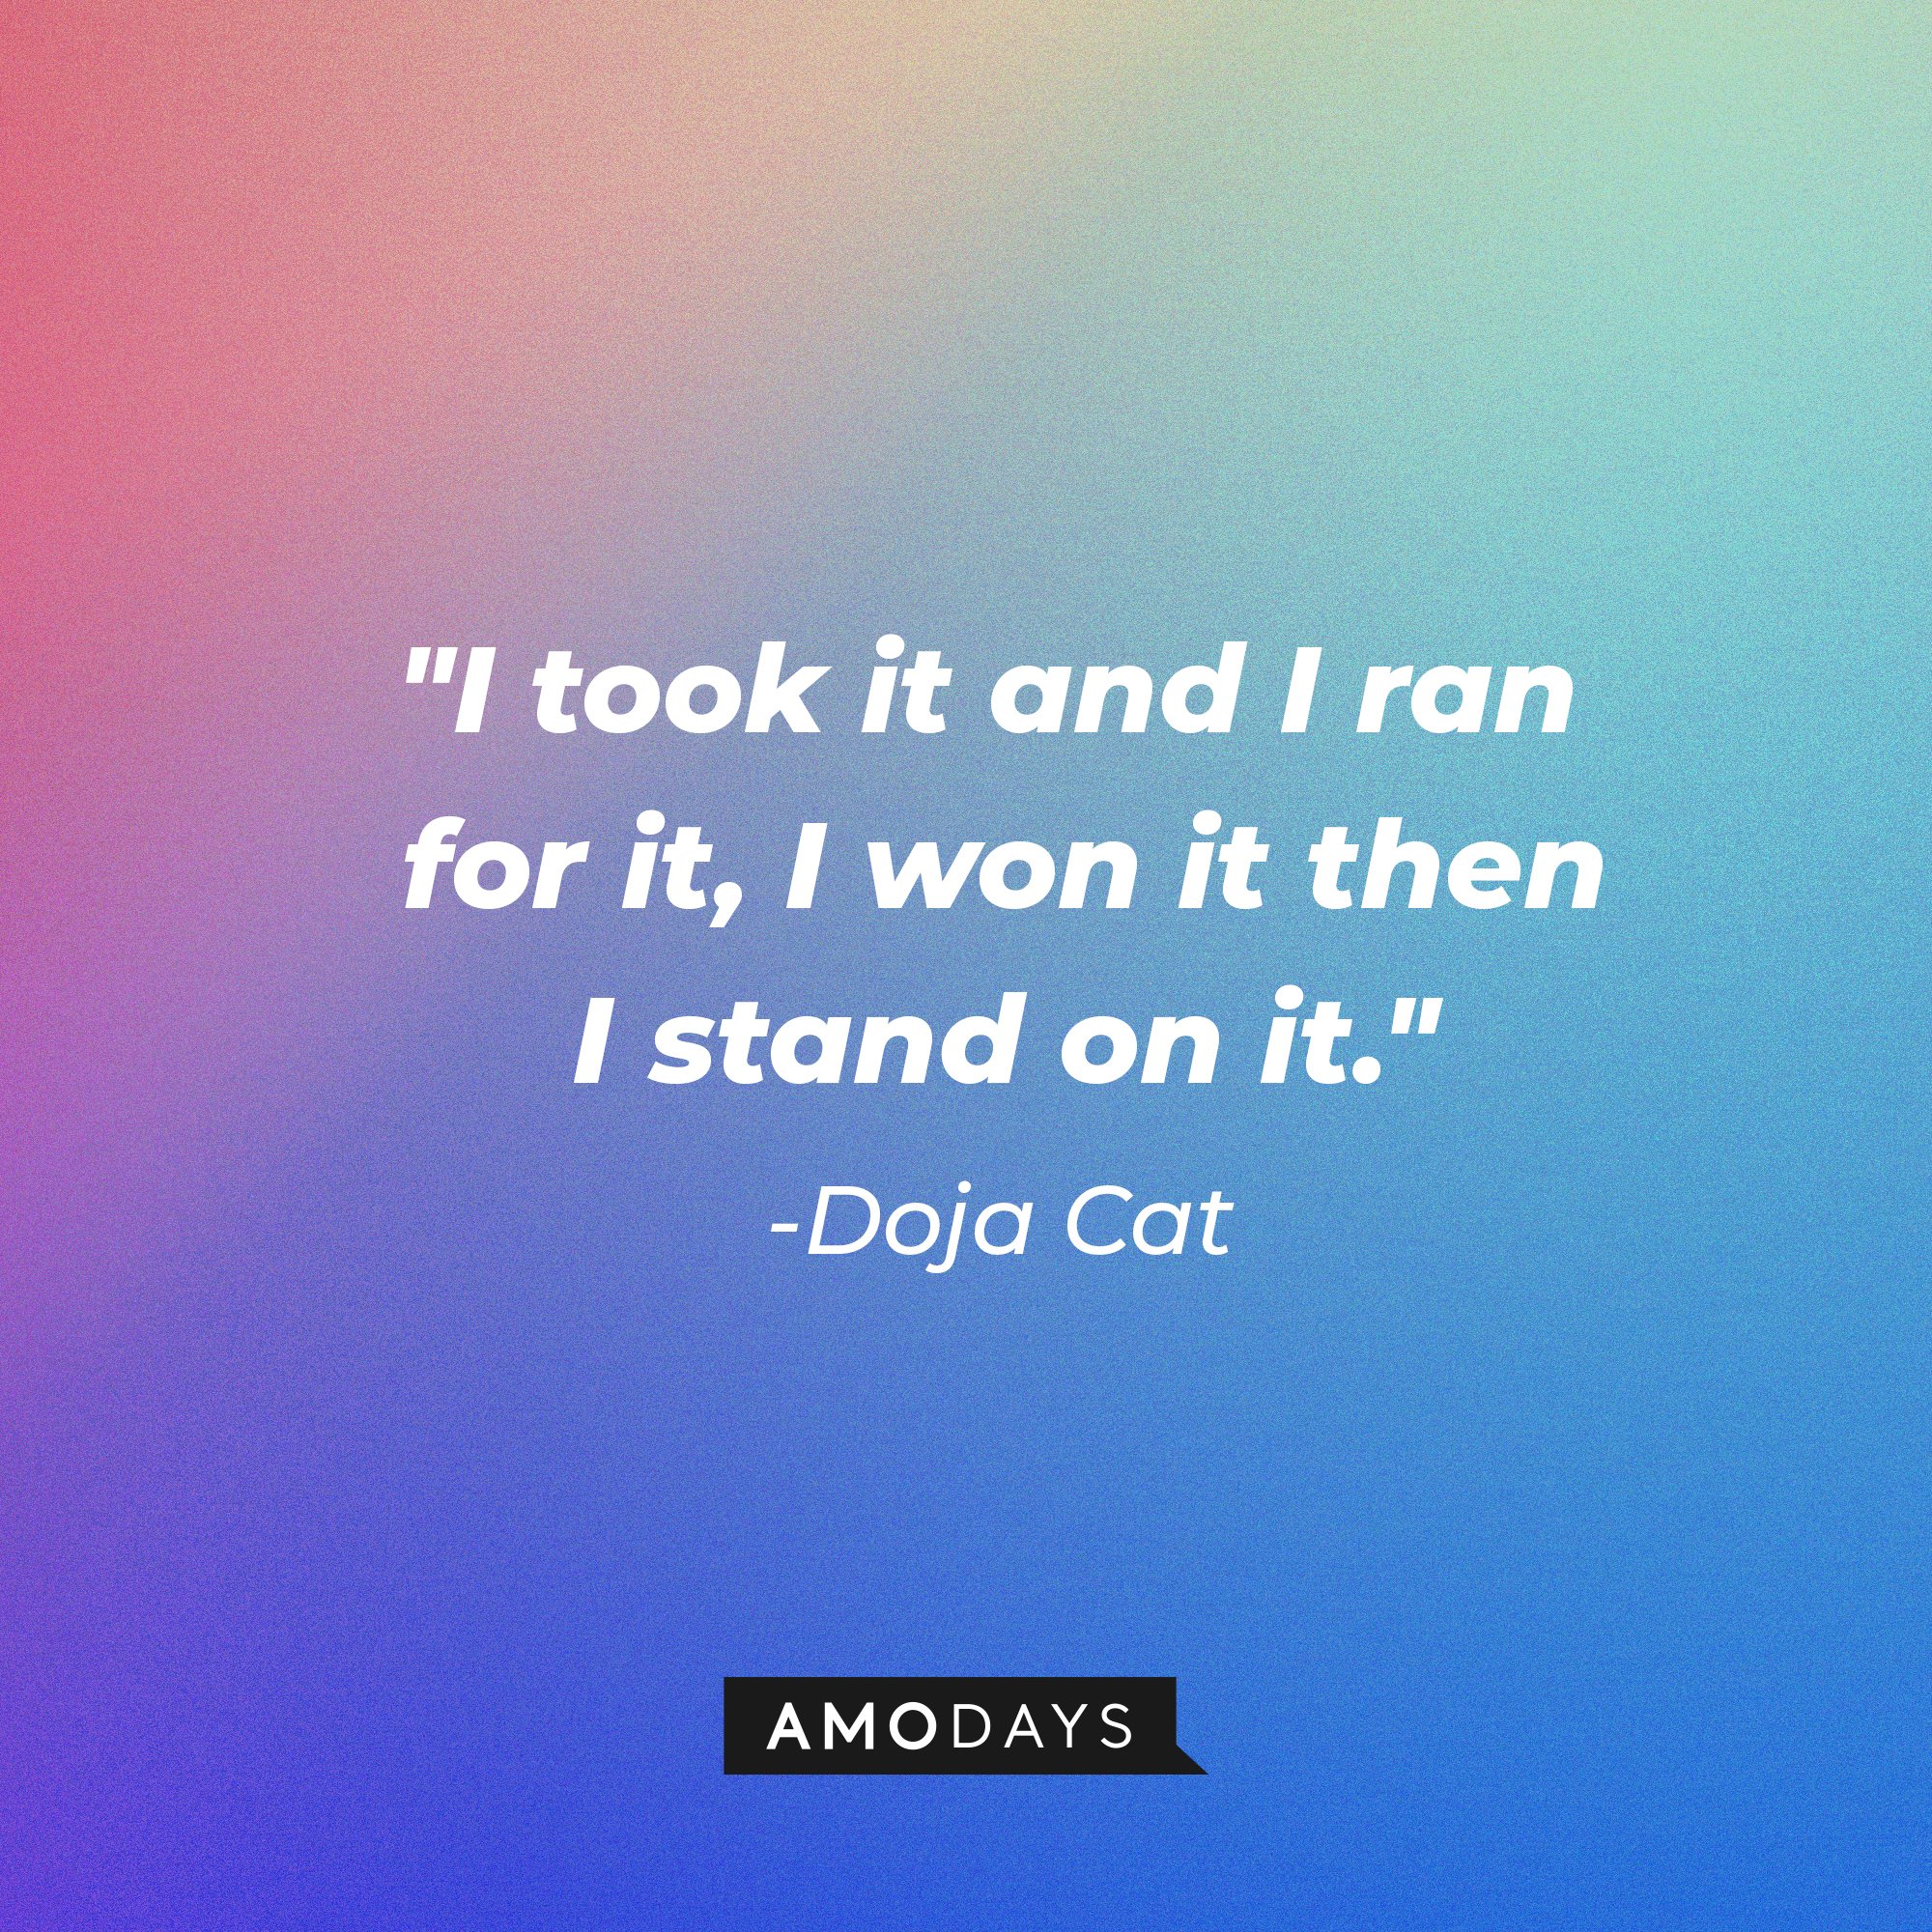 Doja Cat's quote: "I took it and I ran for it, I won it then I stand on it." | Image: AmoDays